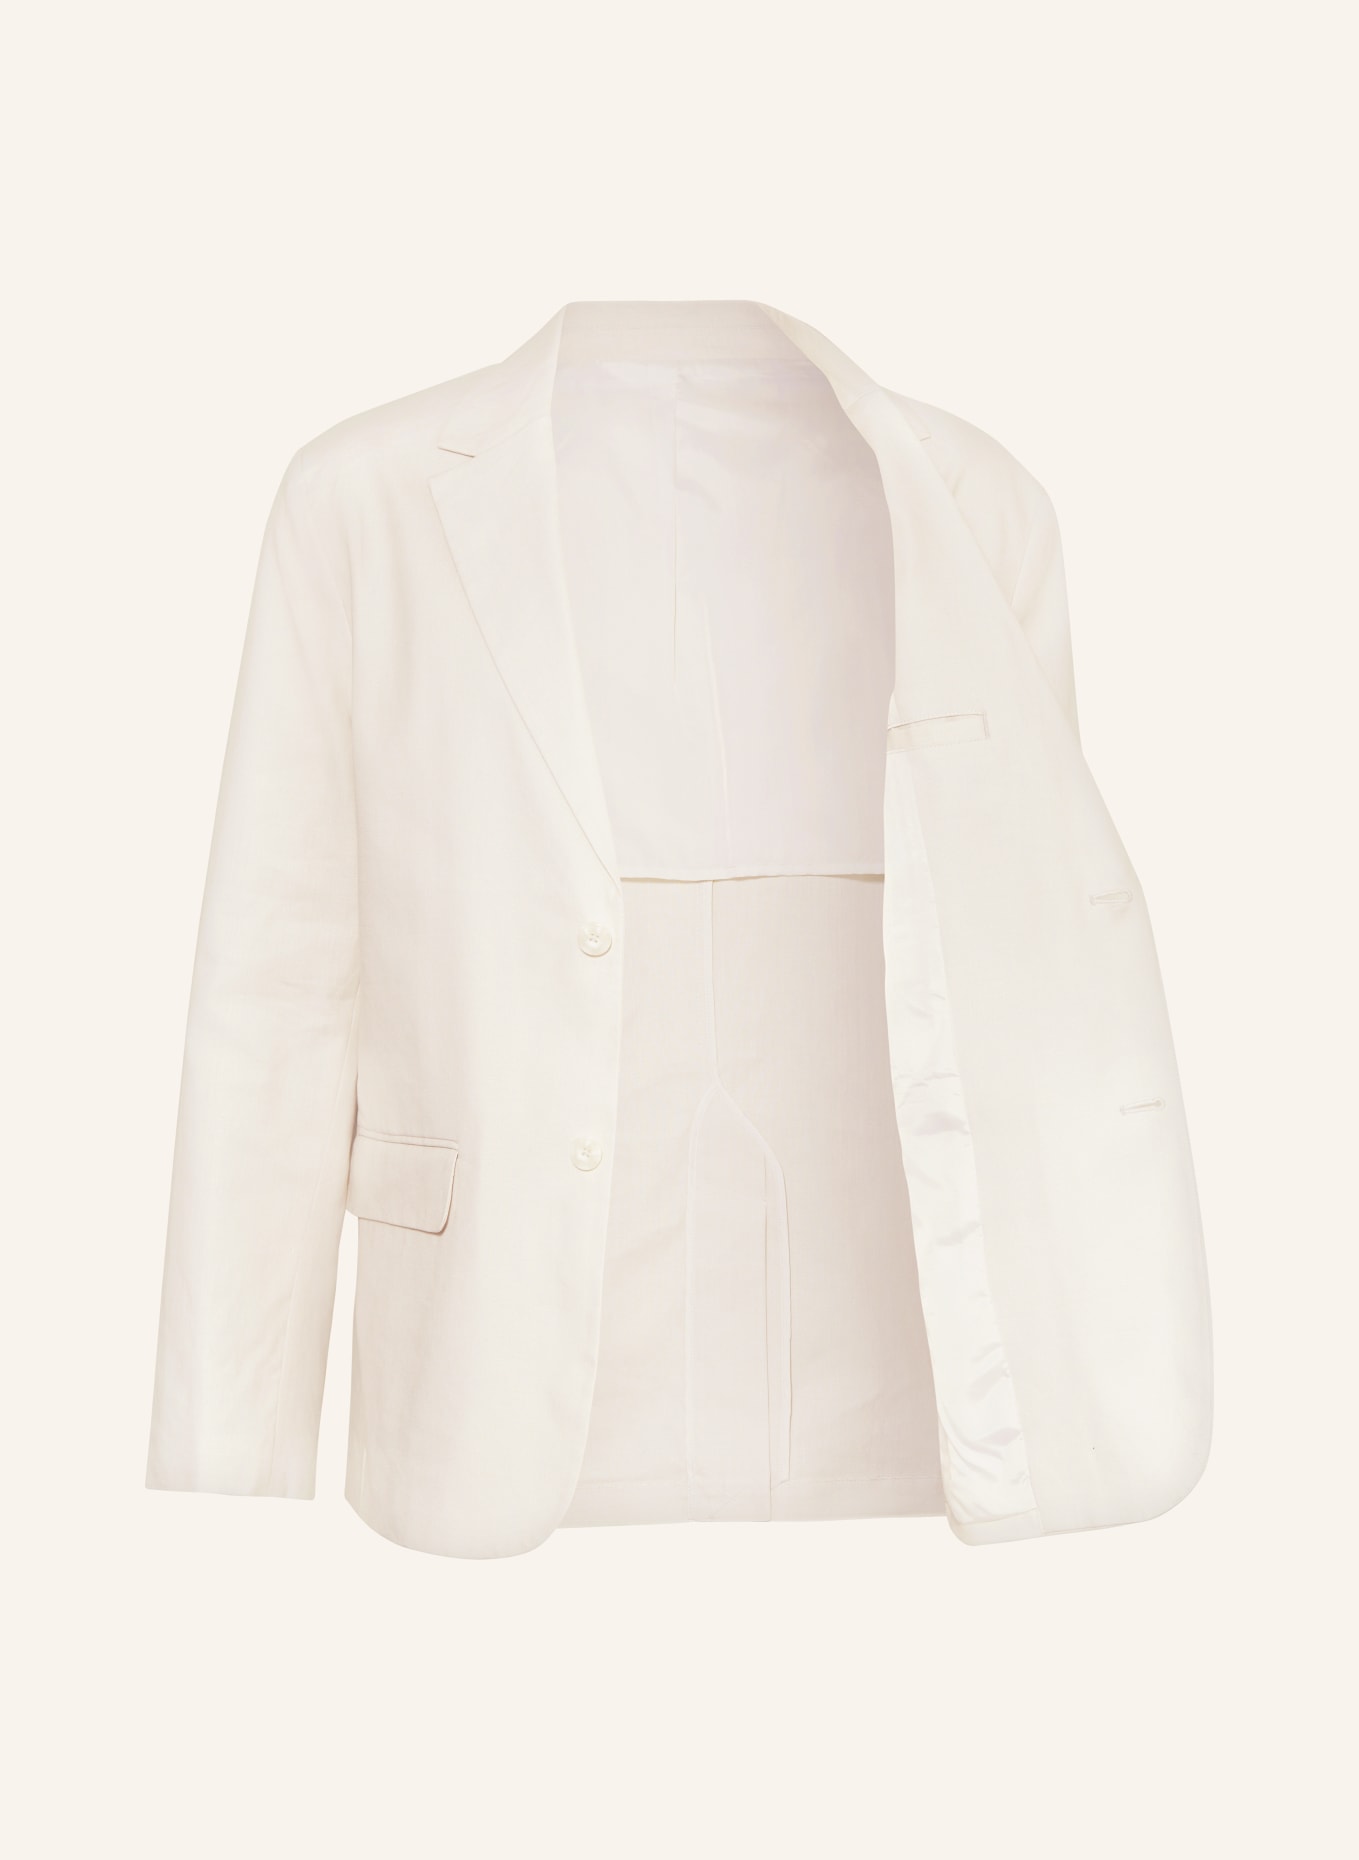 Calvin Klein Tailored jacket regular fit with linen, Color: 0K9 White Onyx (Image 4)